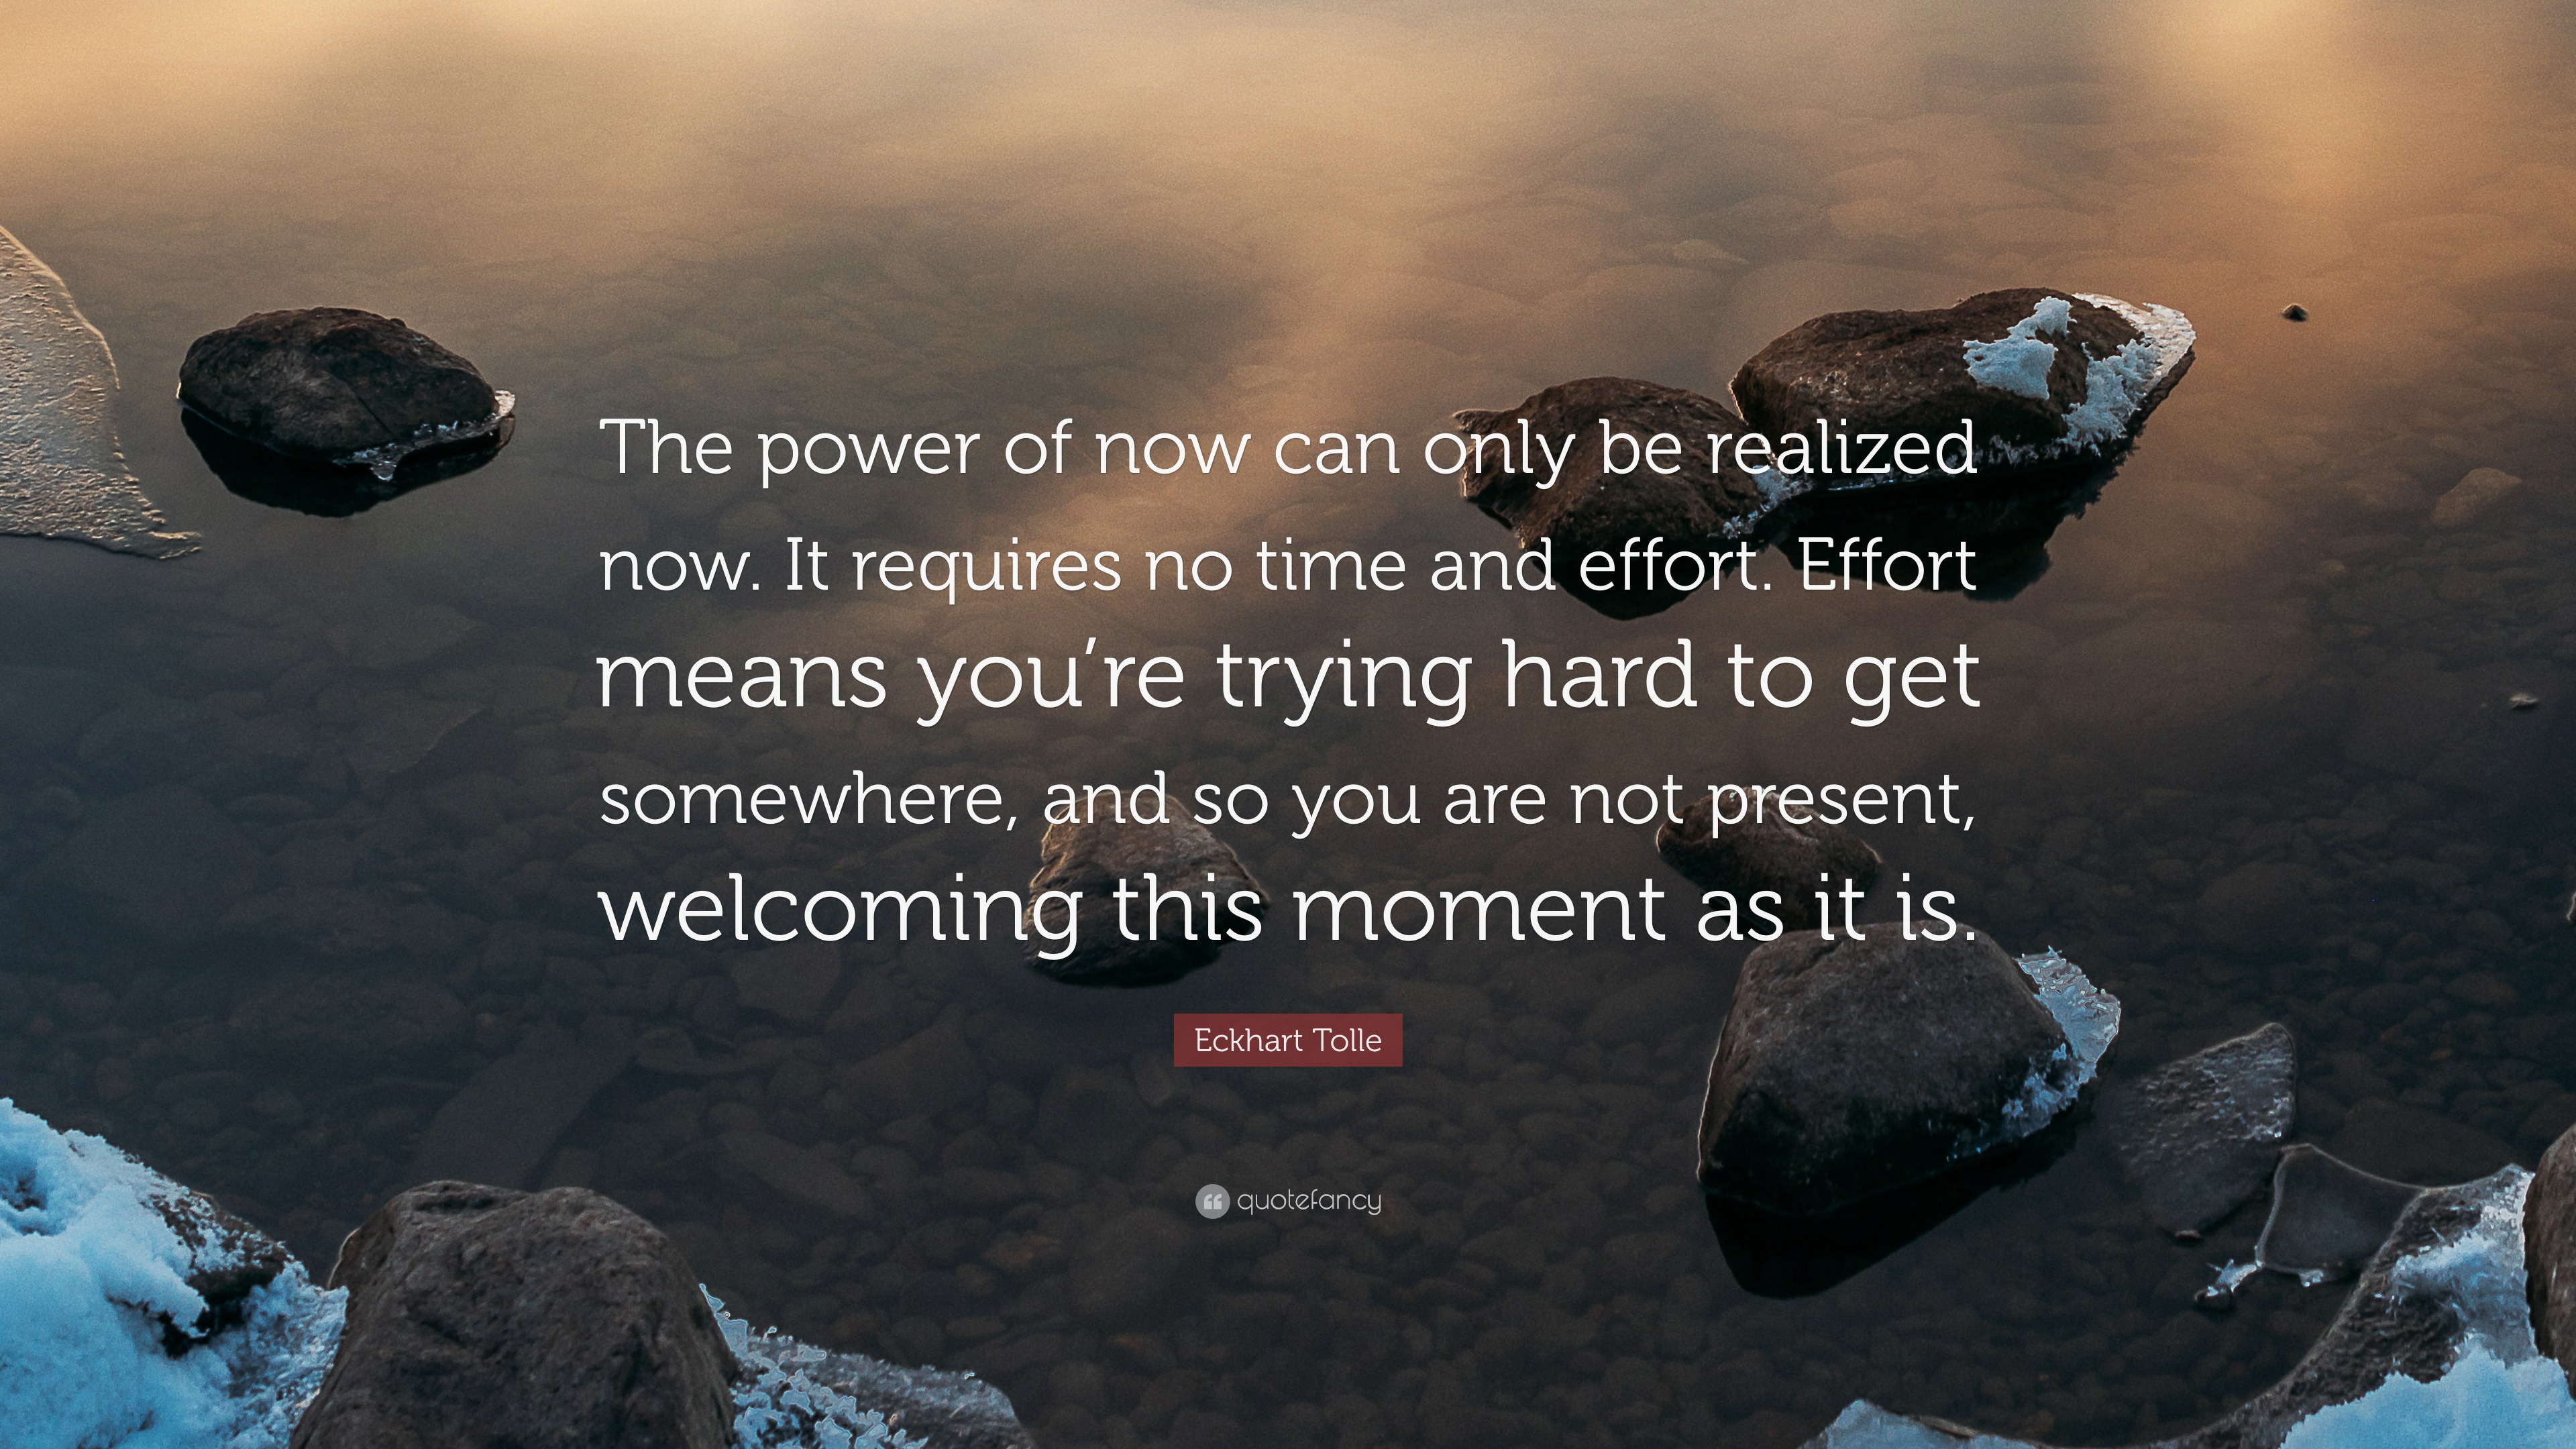 Eckhart Tolle Quote: “The power of now can only be realized now. It  requires no time and effort. Effort means you're trying hard to get  somewh”